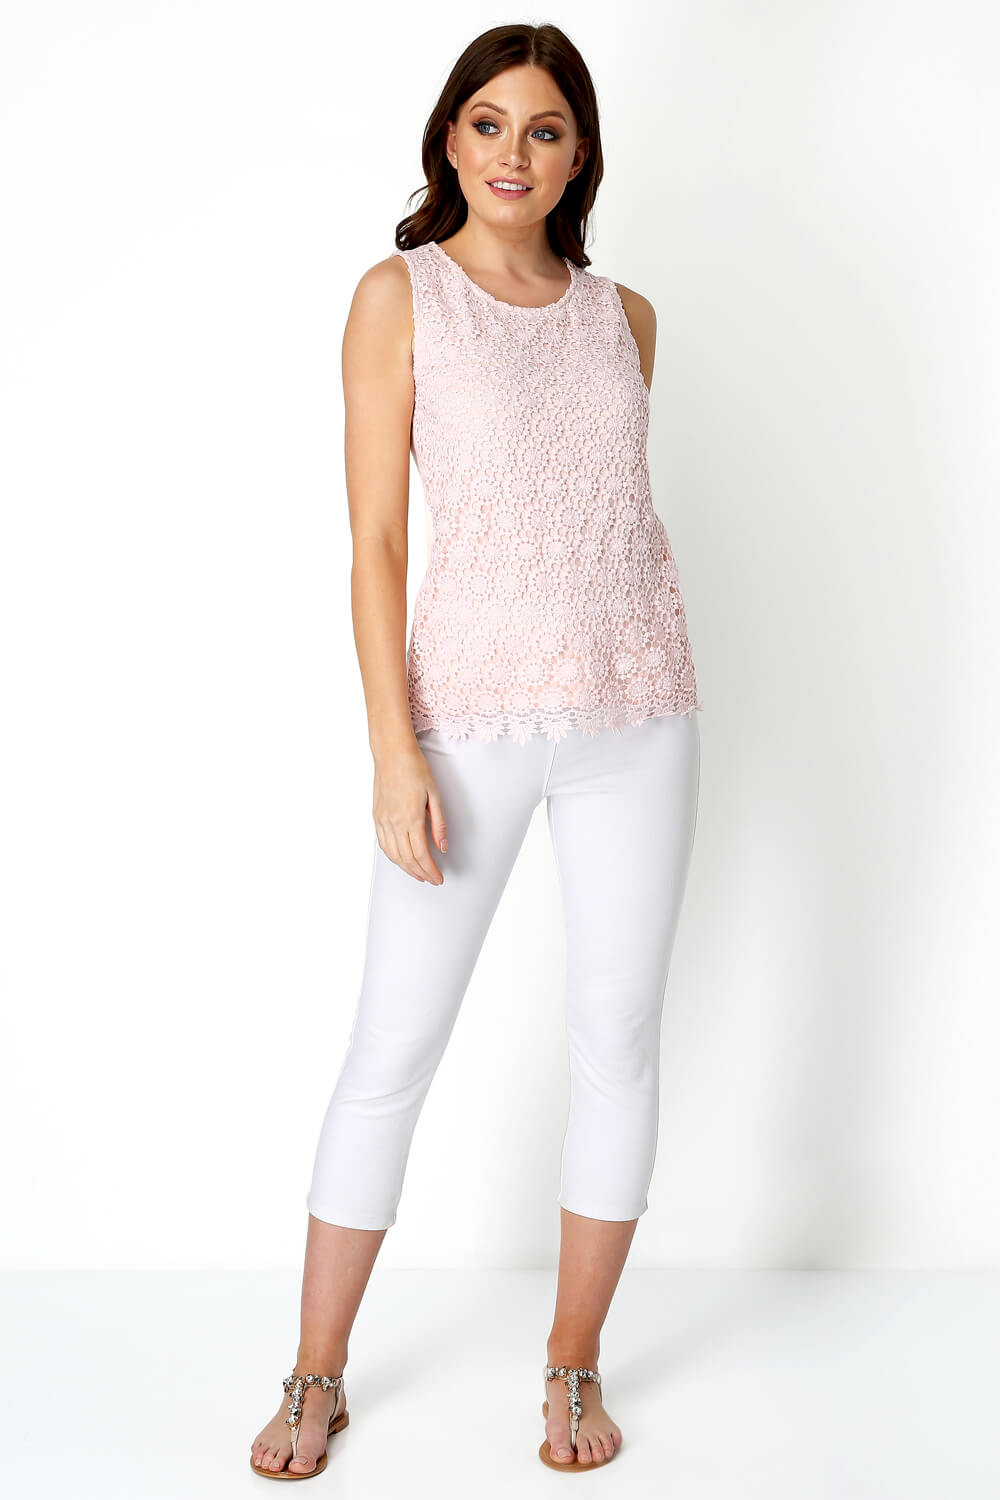 Light Pink Lace Front Jersey Vest Top, Image 2 of 8